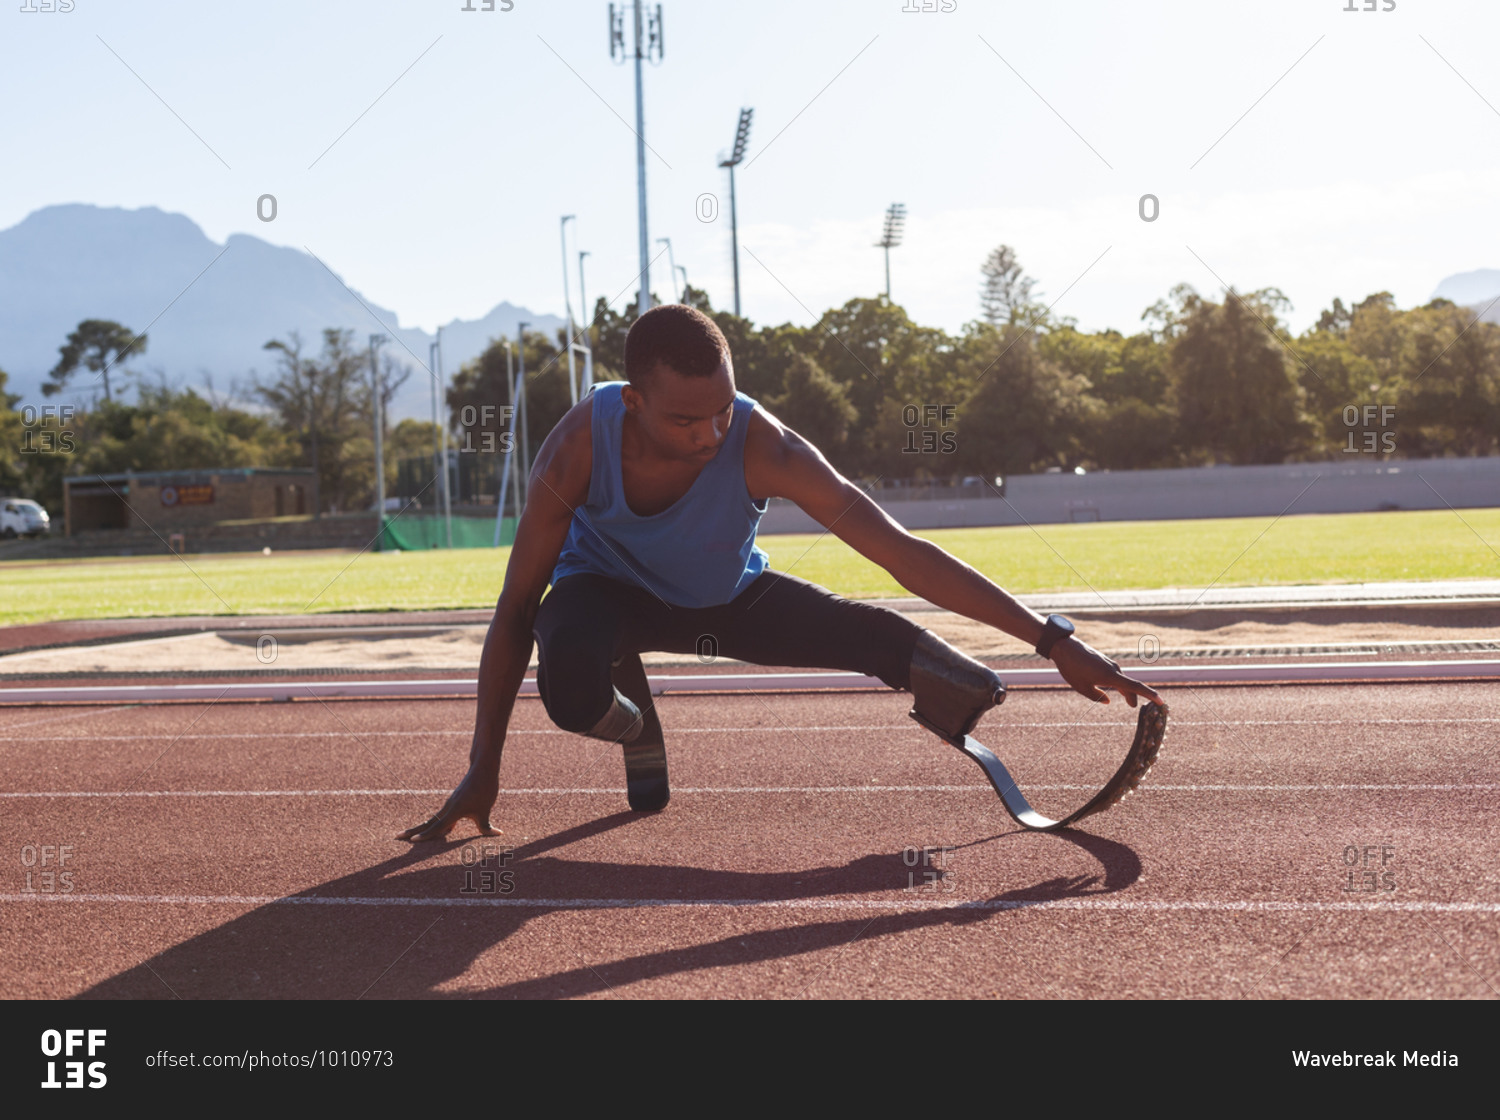 Fit, mixed race disabled male athlete at an outdoor sports stadium, preparing before workout stretching on race track wearing running blades. Disability athletics sport training.